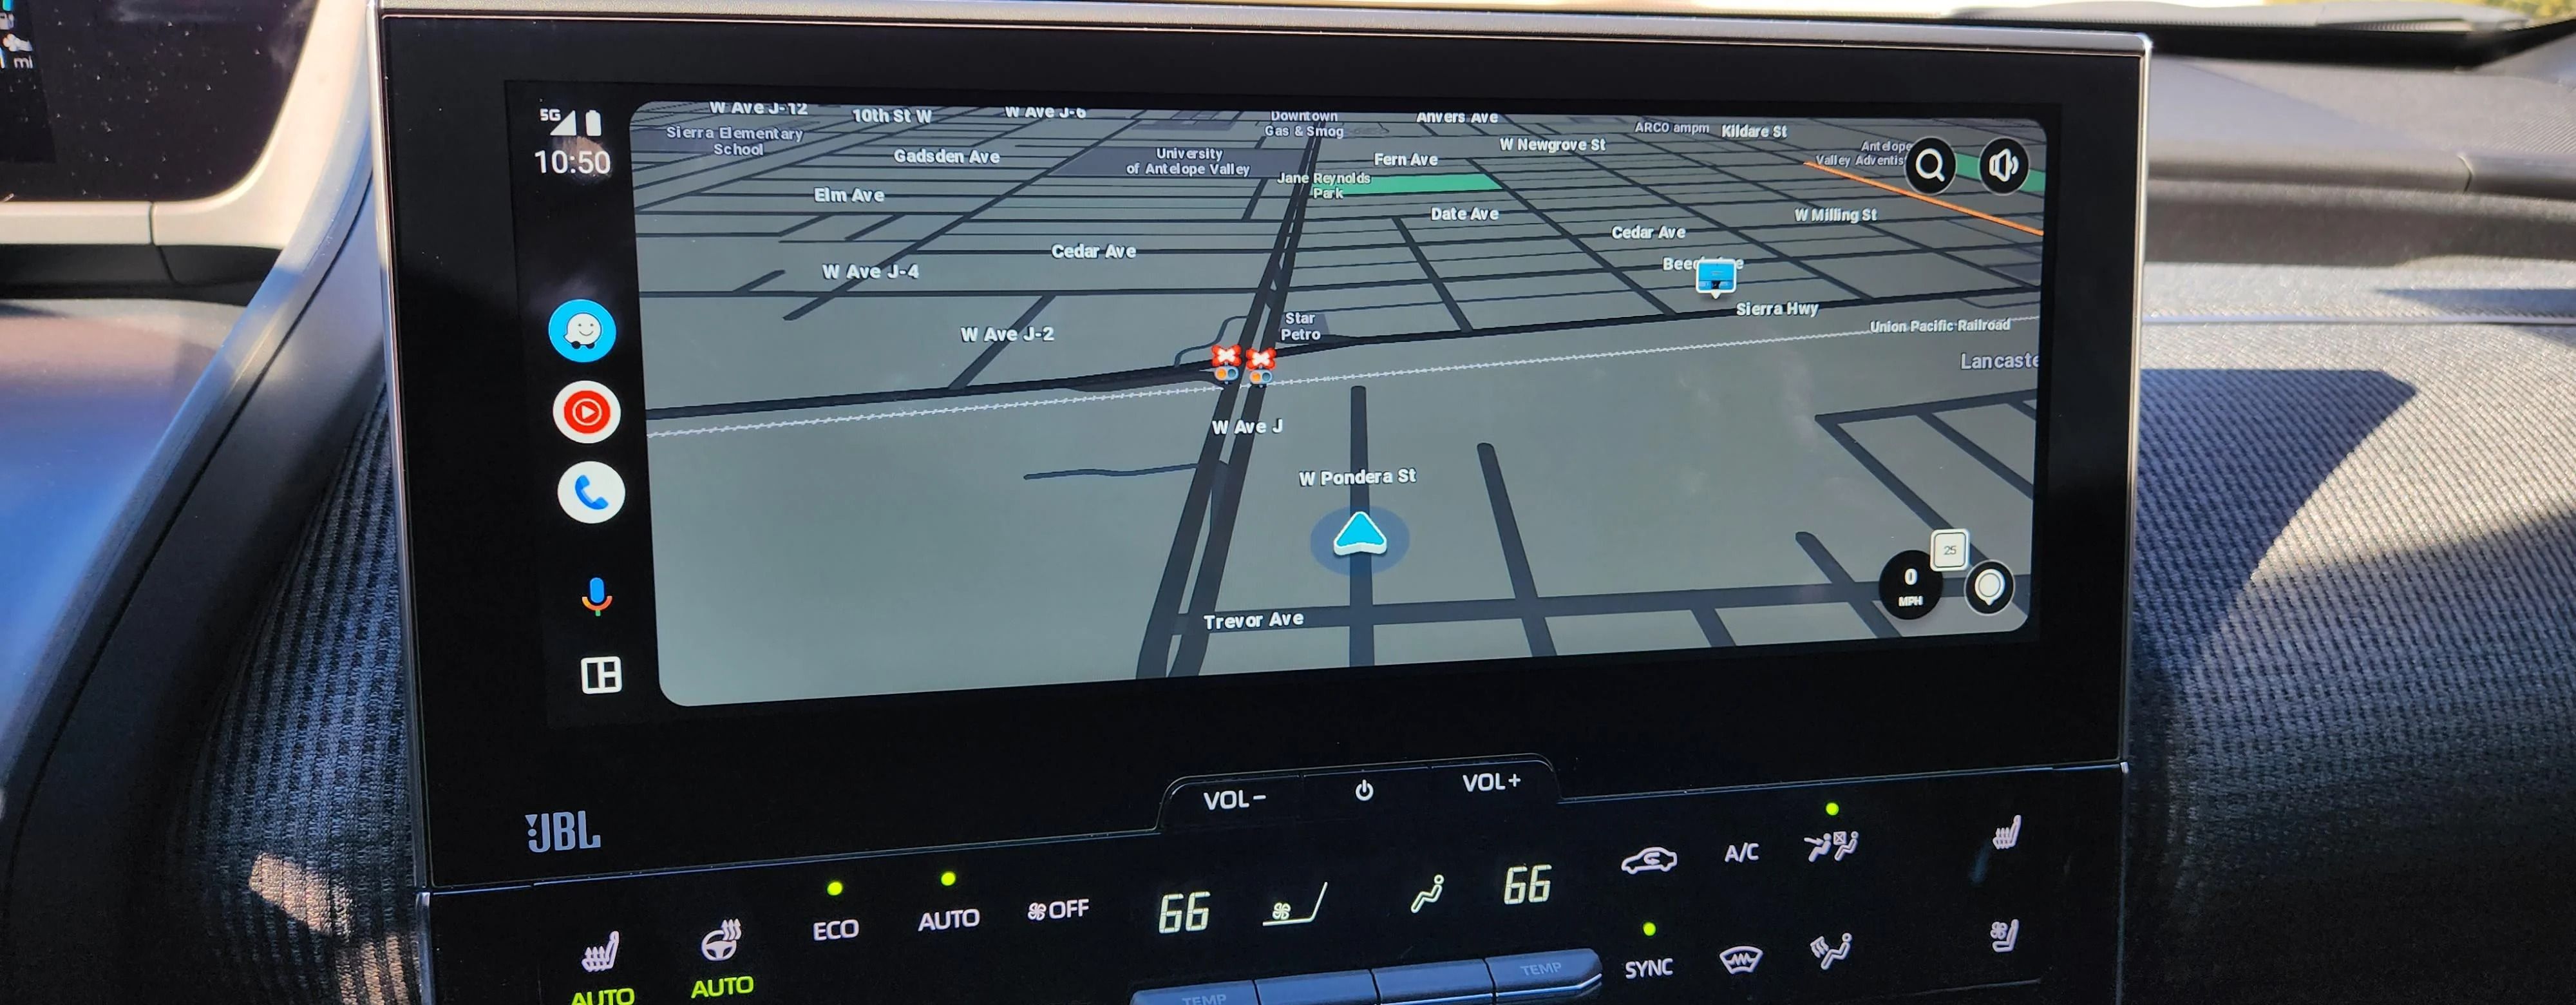 Wyze running on Android Auto's redesign on a wide in-car display.